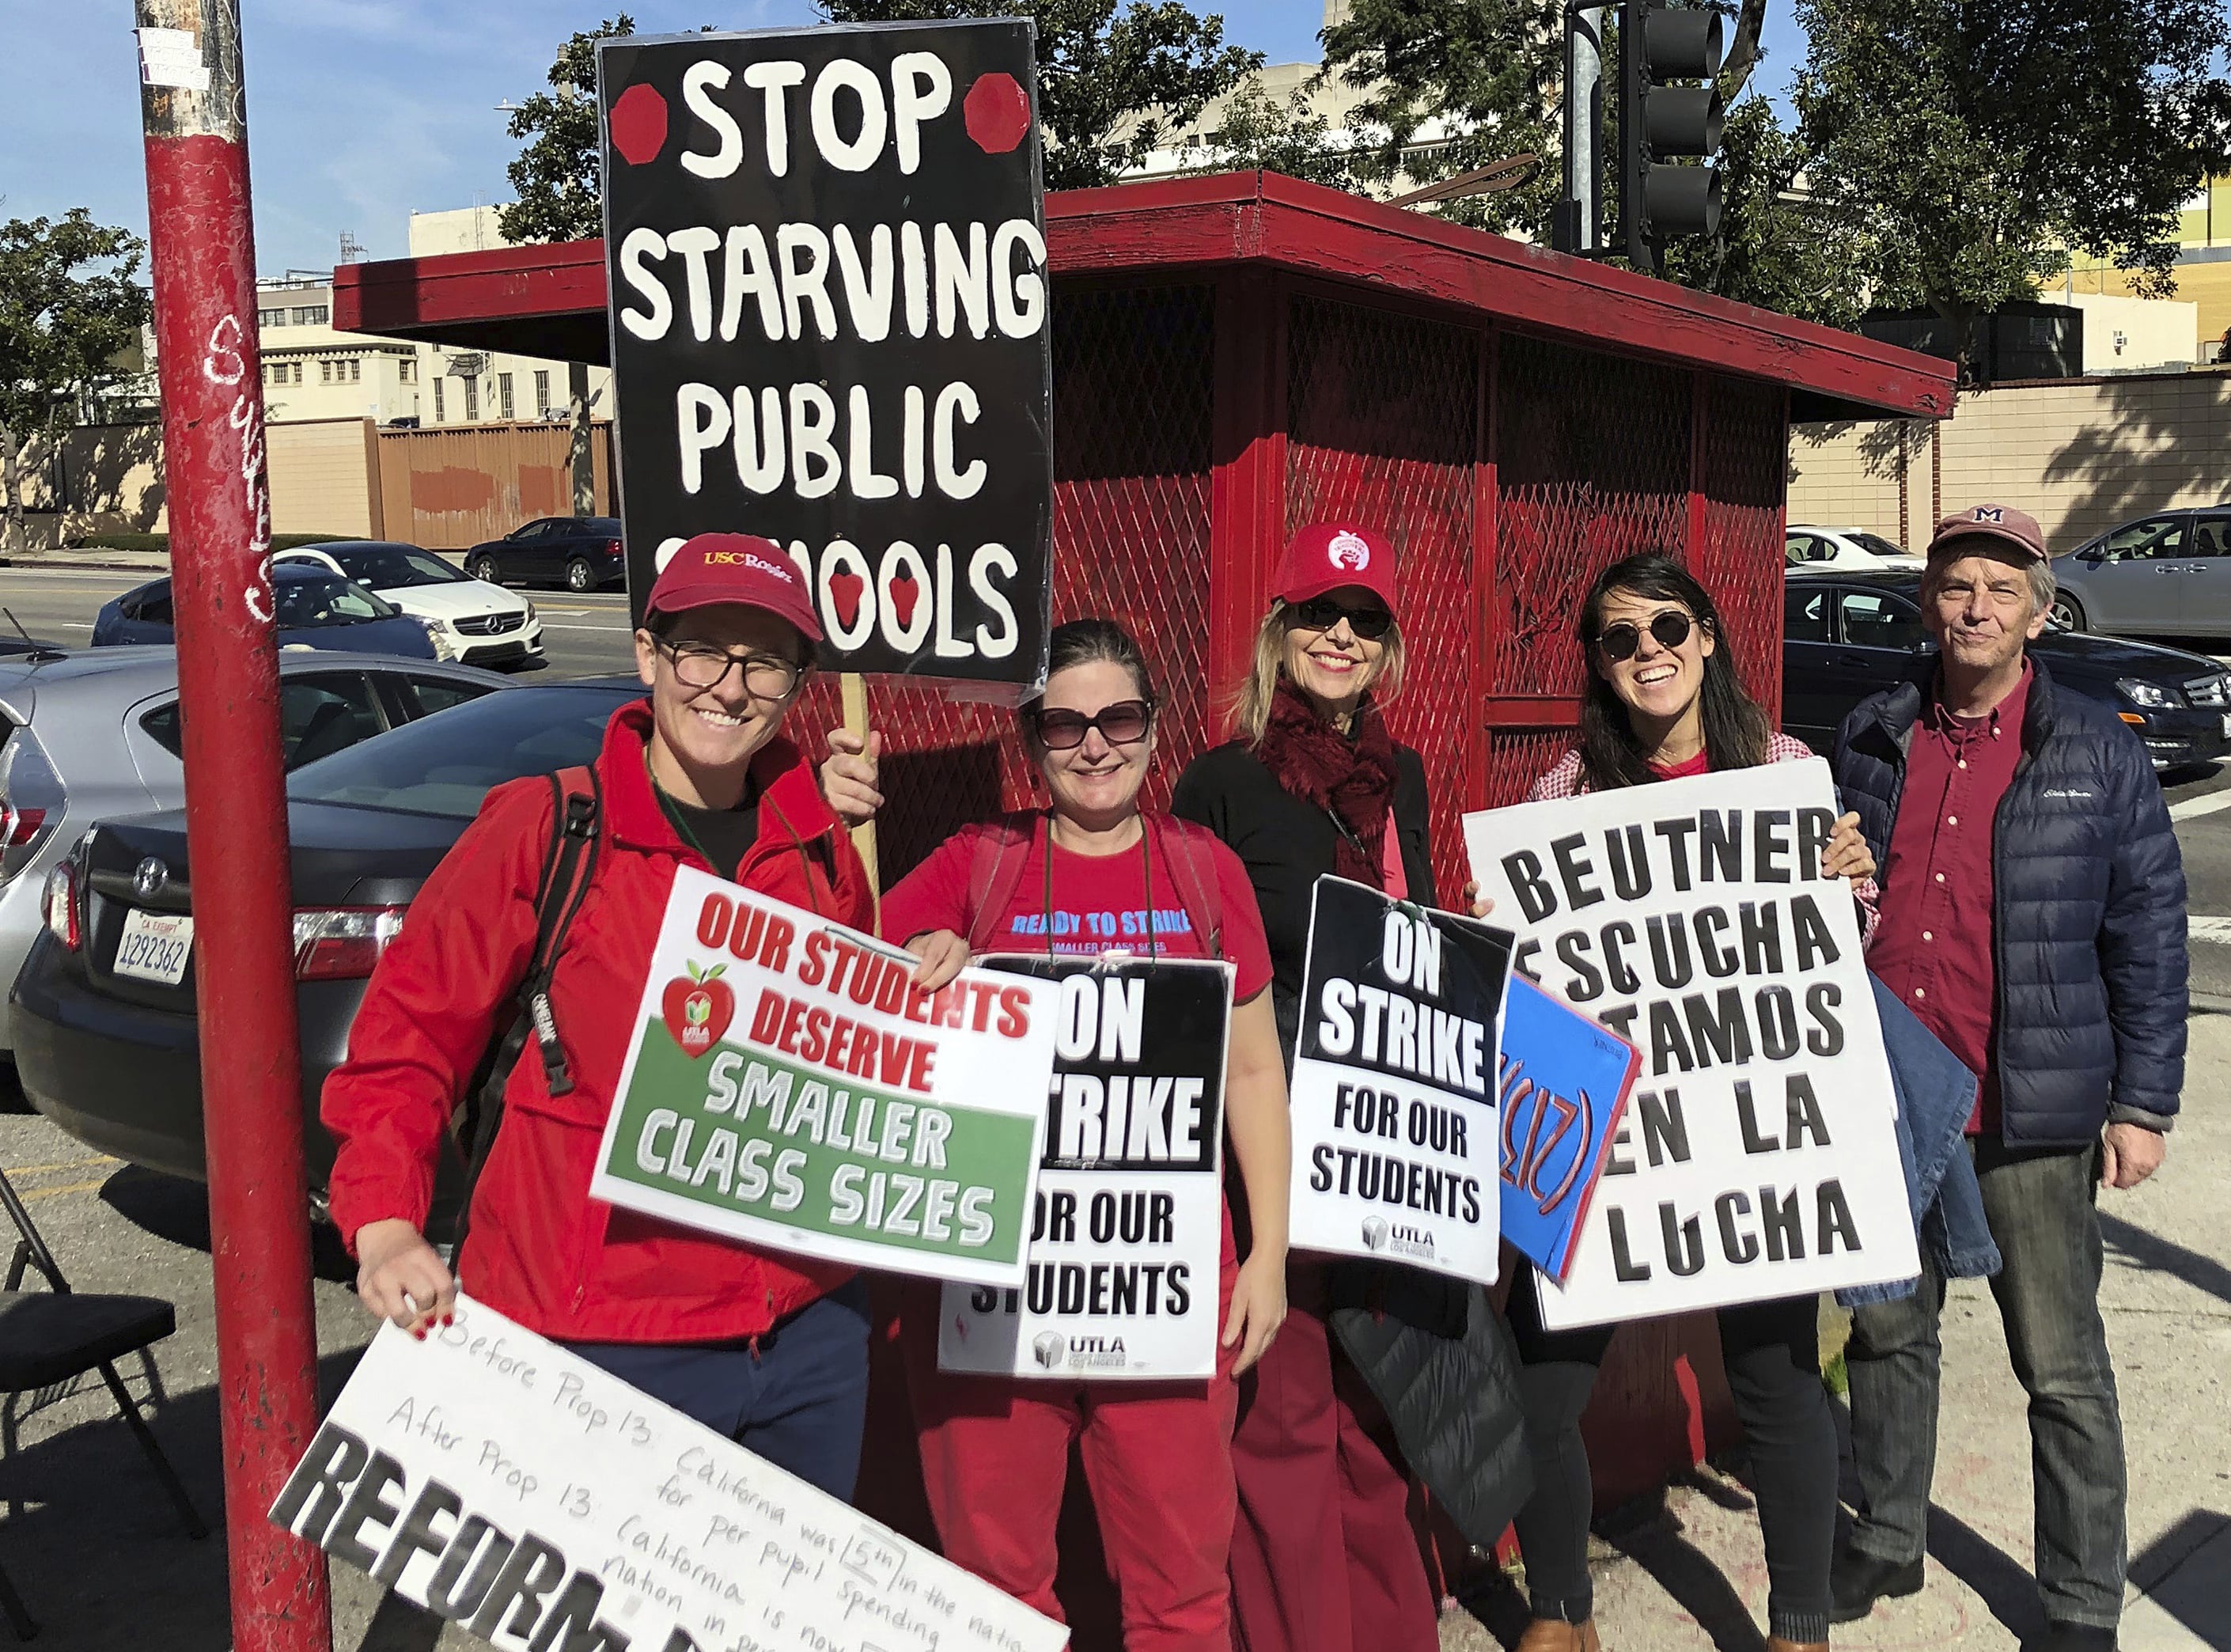 Marianne O'Brien, second from right, and her fellow teachers pose in downtown Los Angeles after rallying at City Hall, Tuesday, Jan. 22, 2019. A tentative deal between Los Angeles school officials and the teachers union will allow educators to return to classrooms after a six-day strike in the nation's second-largest district. O'Brien said she was ready to support the contract but would consider voting "No" if schools don't get additional support staff like nurses and counselors.